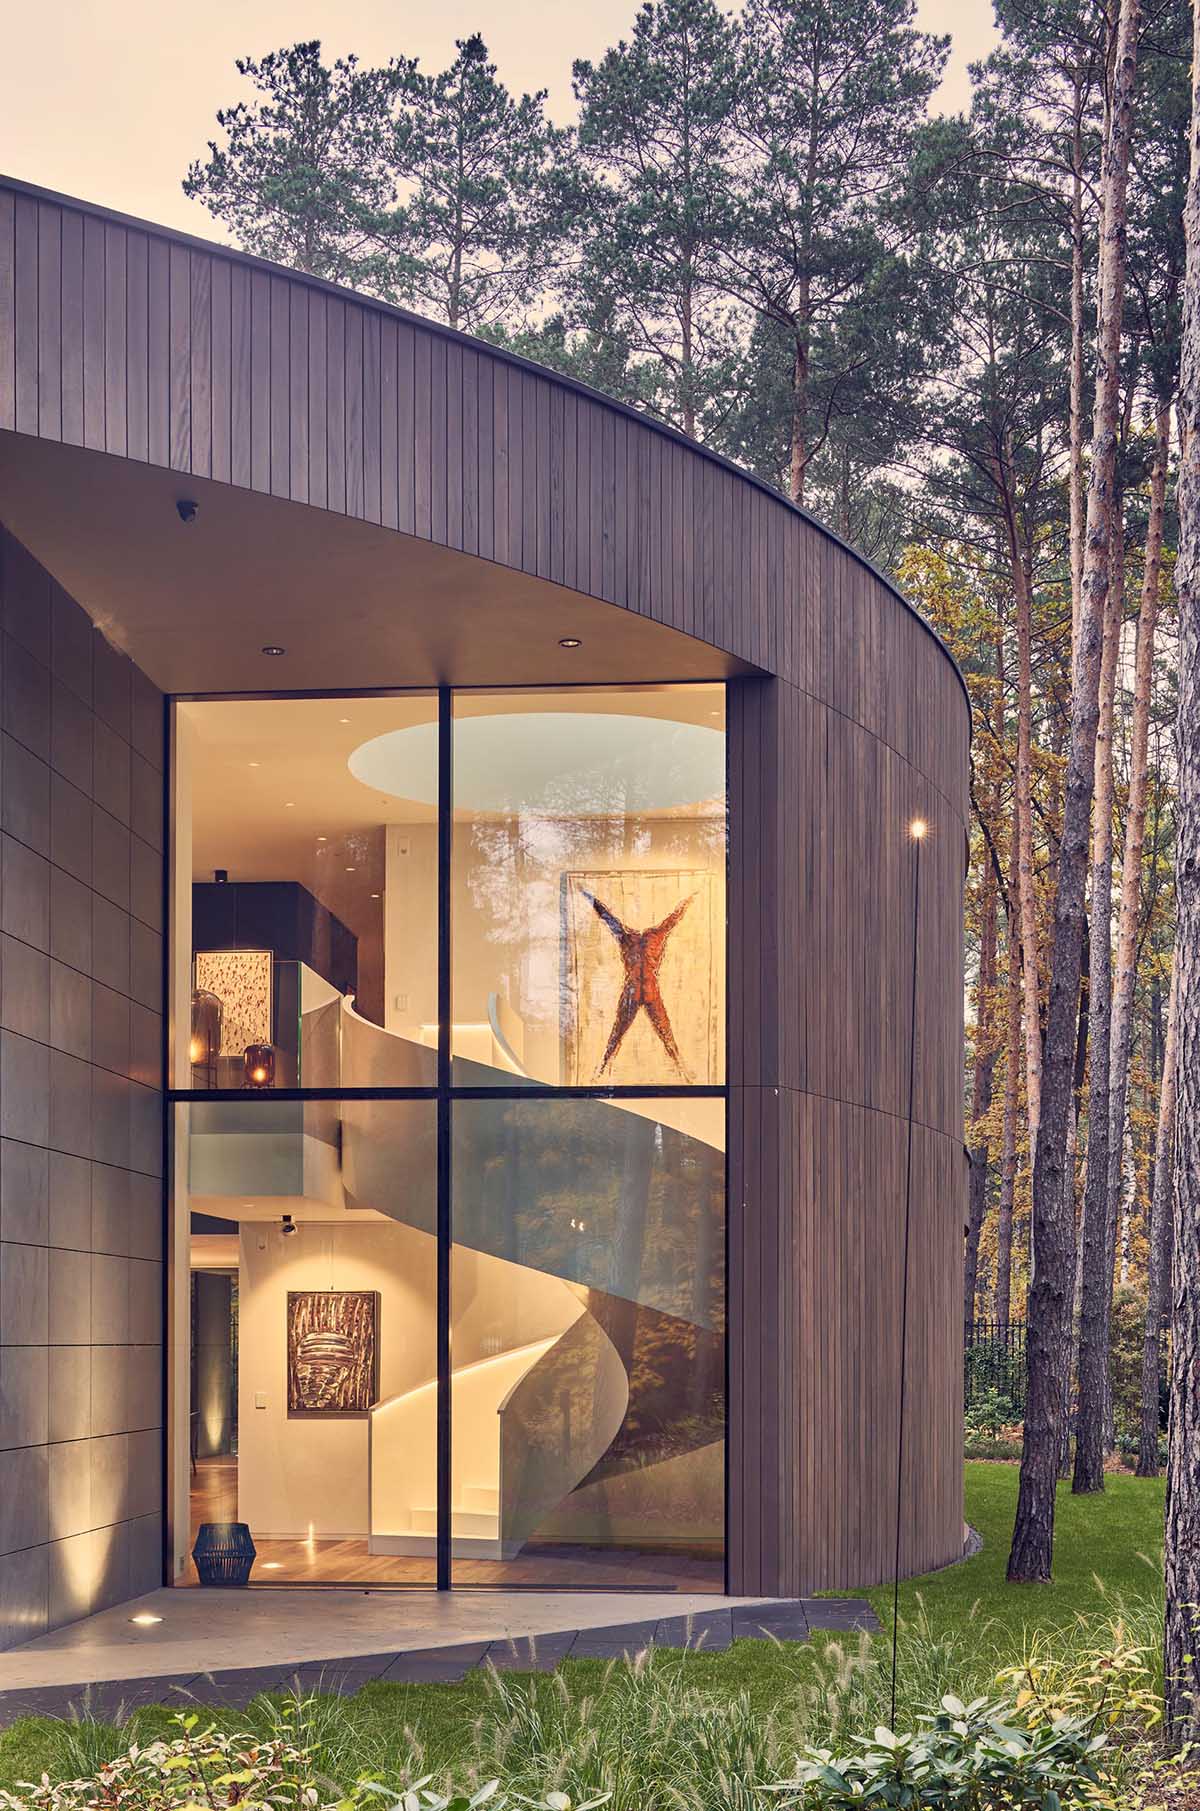 A modern circular home with a wood exterior and large windows that provide a glimpse of the interior.